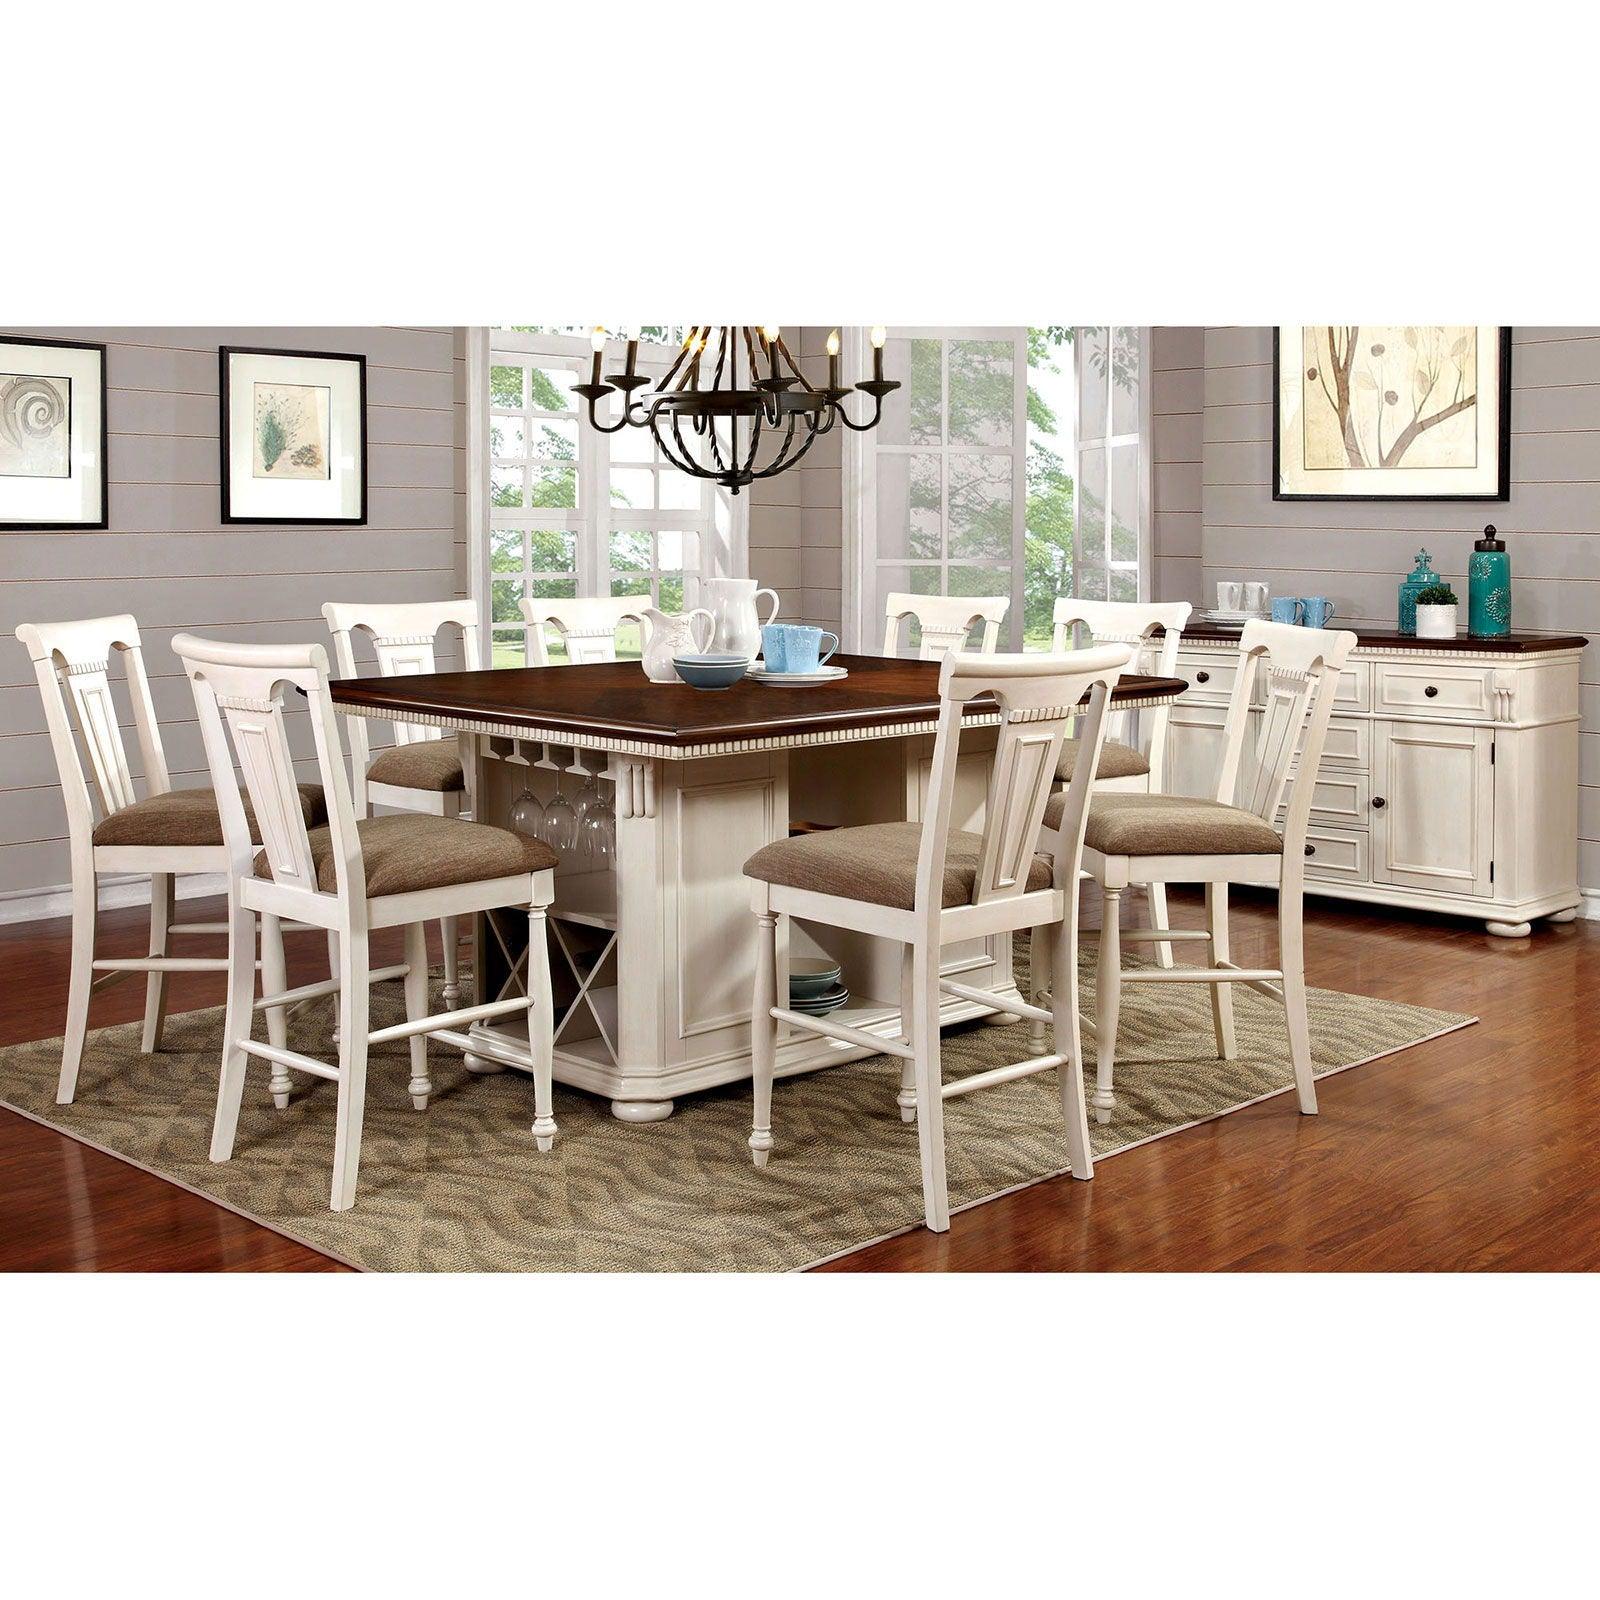 Furniture of America - Sabrina - Counter Height Table - Off-White / Cherry - 5th Avenue Furniture